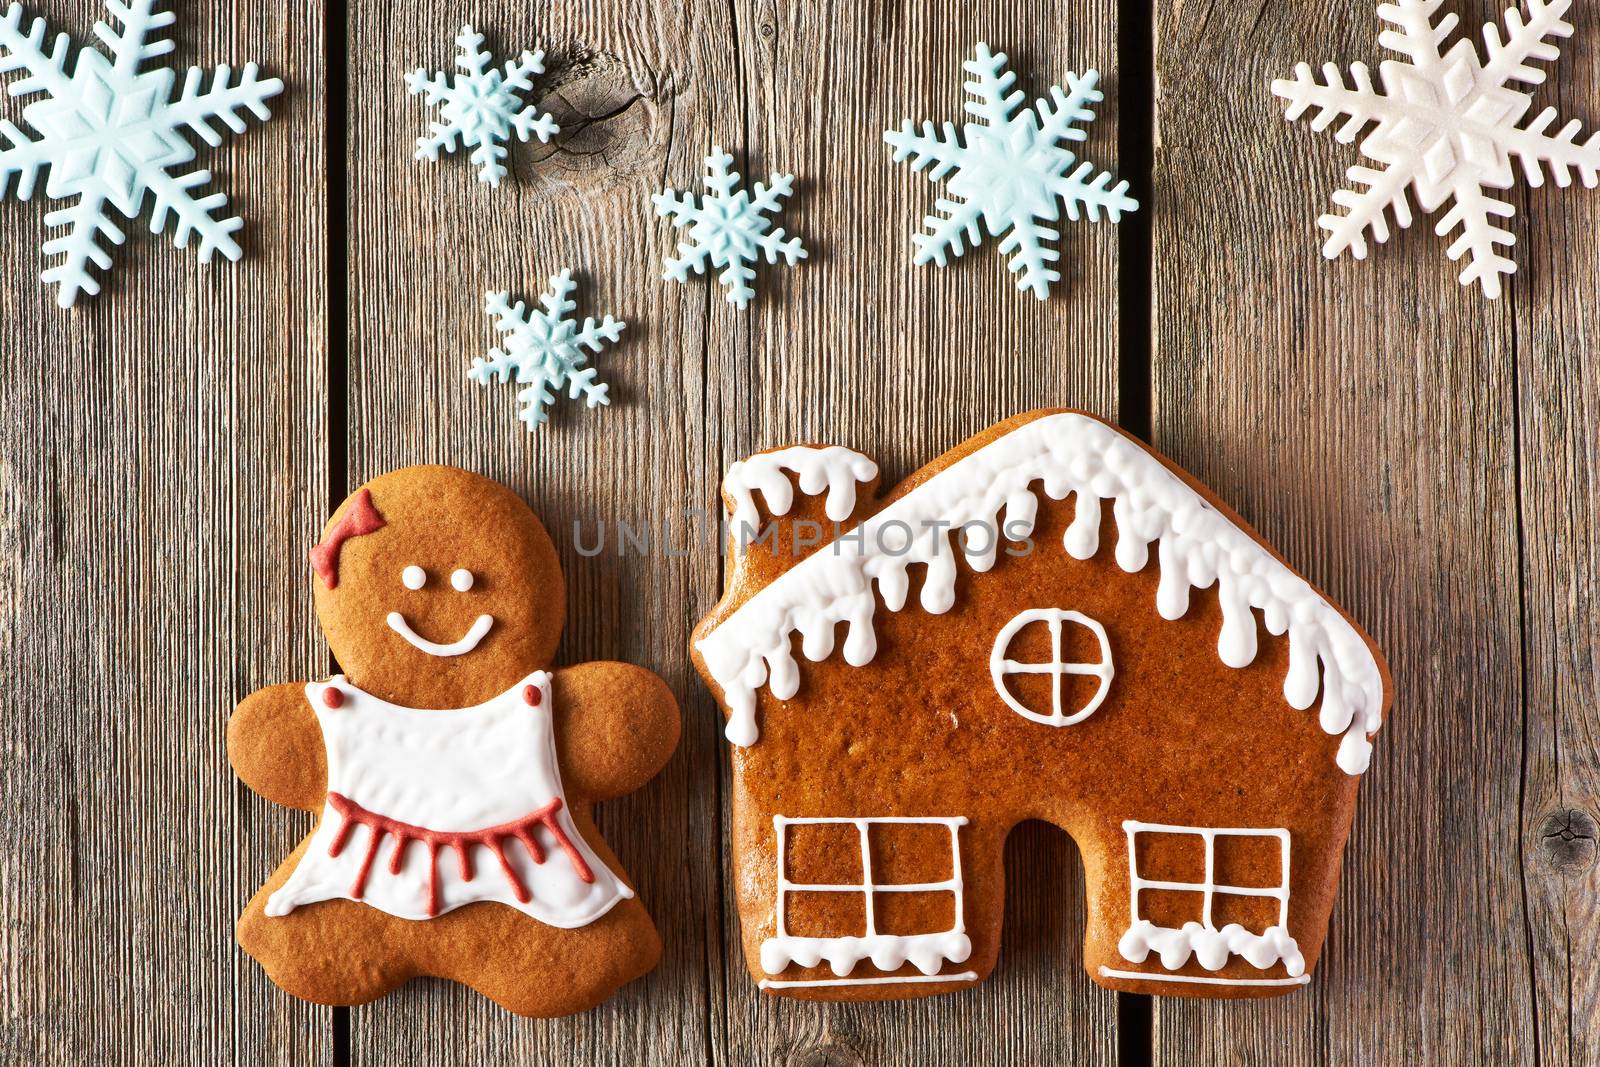 Christmas gingerbread girl and house cookies by haveseen